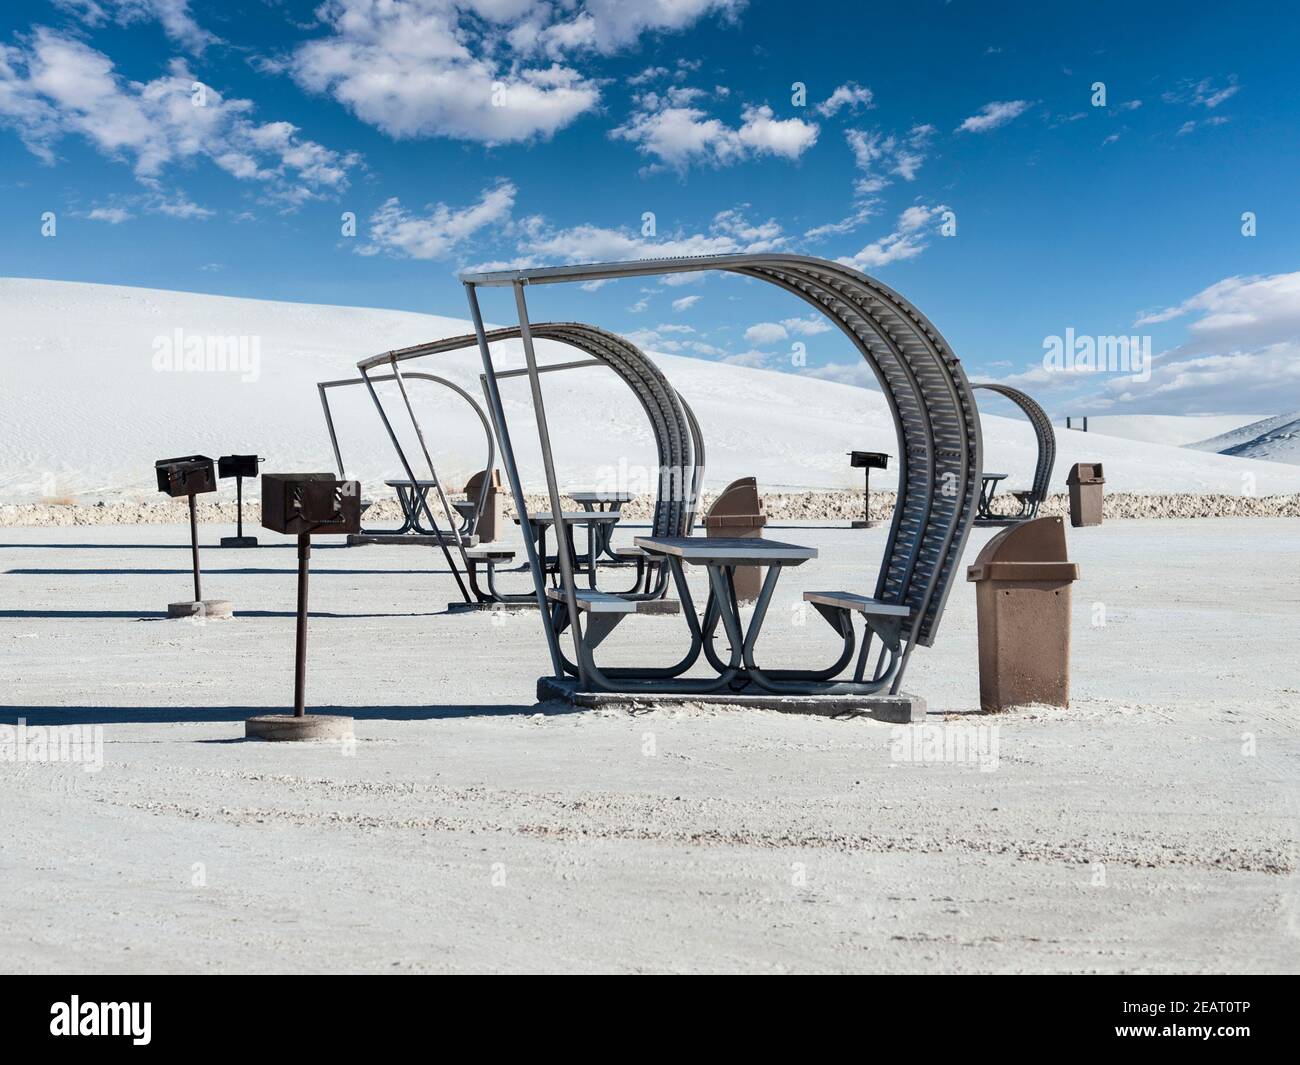 Old style picnic shelters at White Sands National Monument Park near Alamogordo, New Mexico, USA. Stock Photo